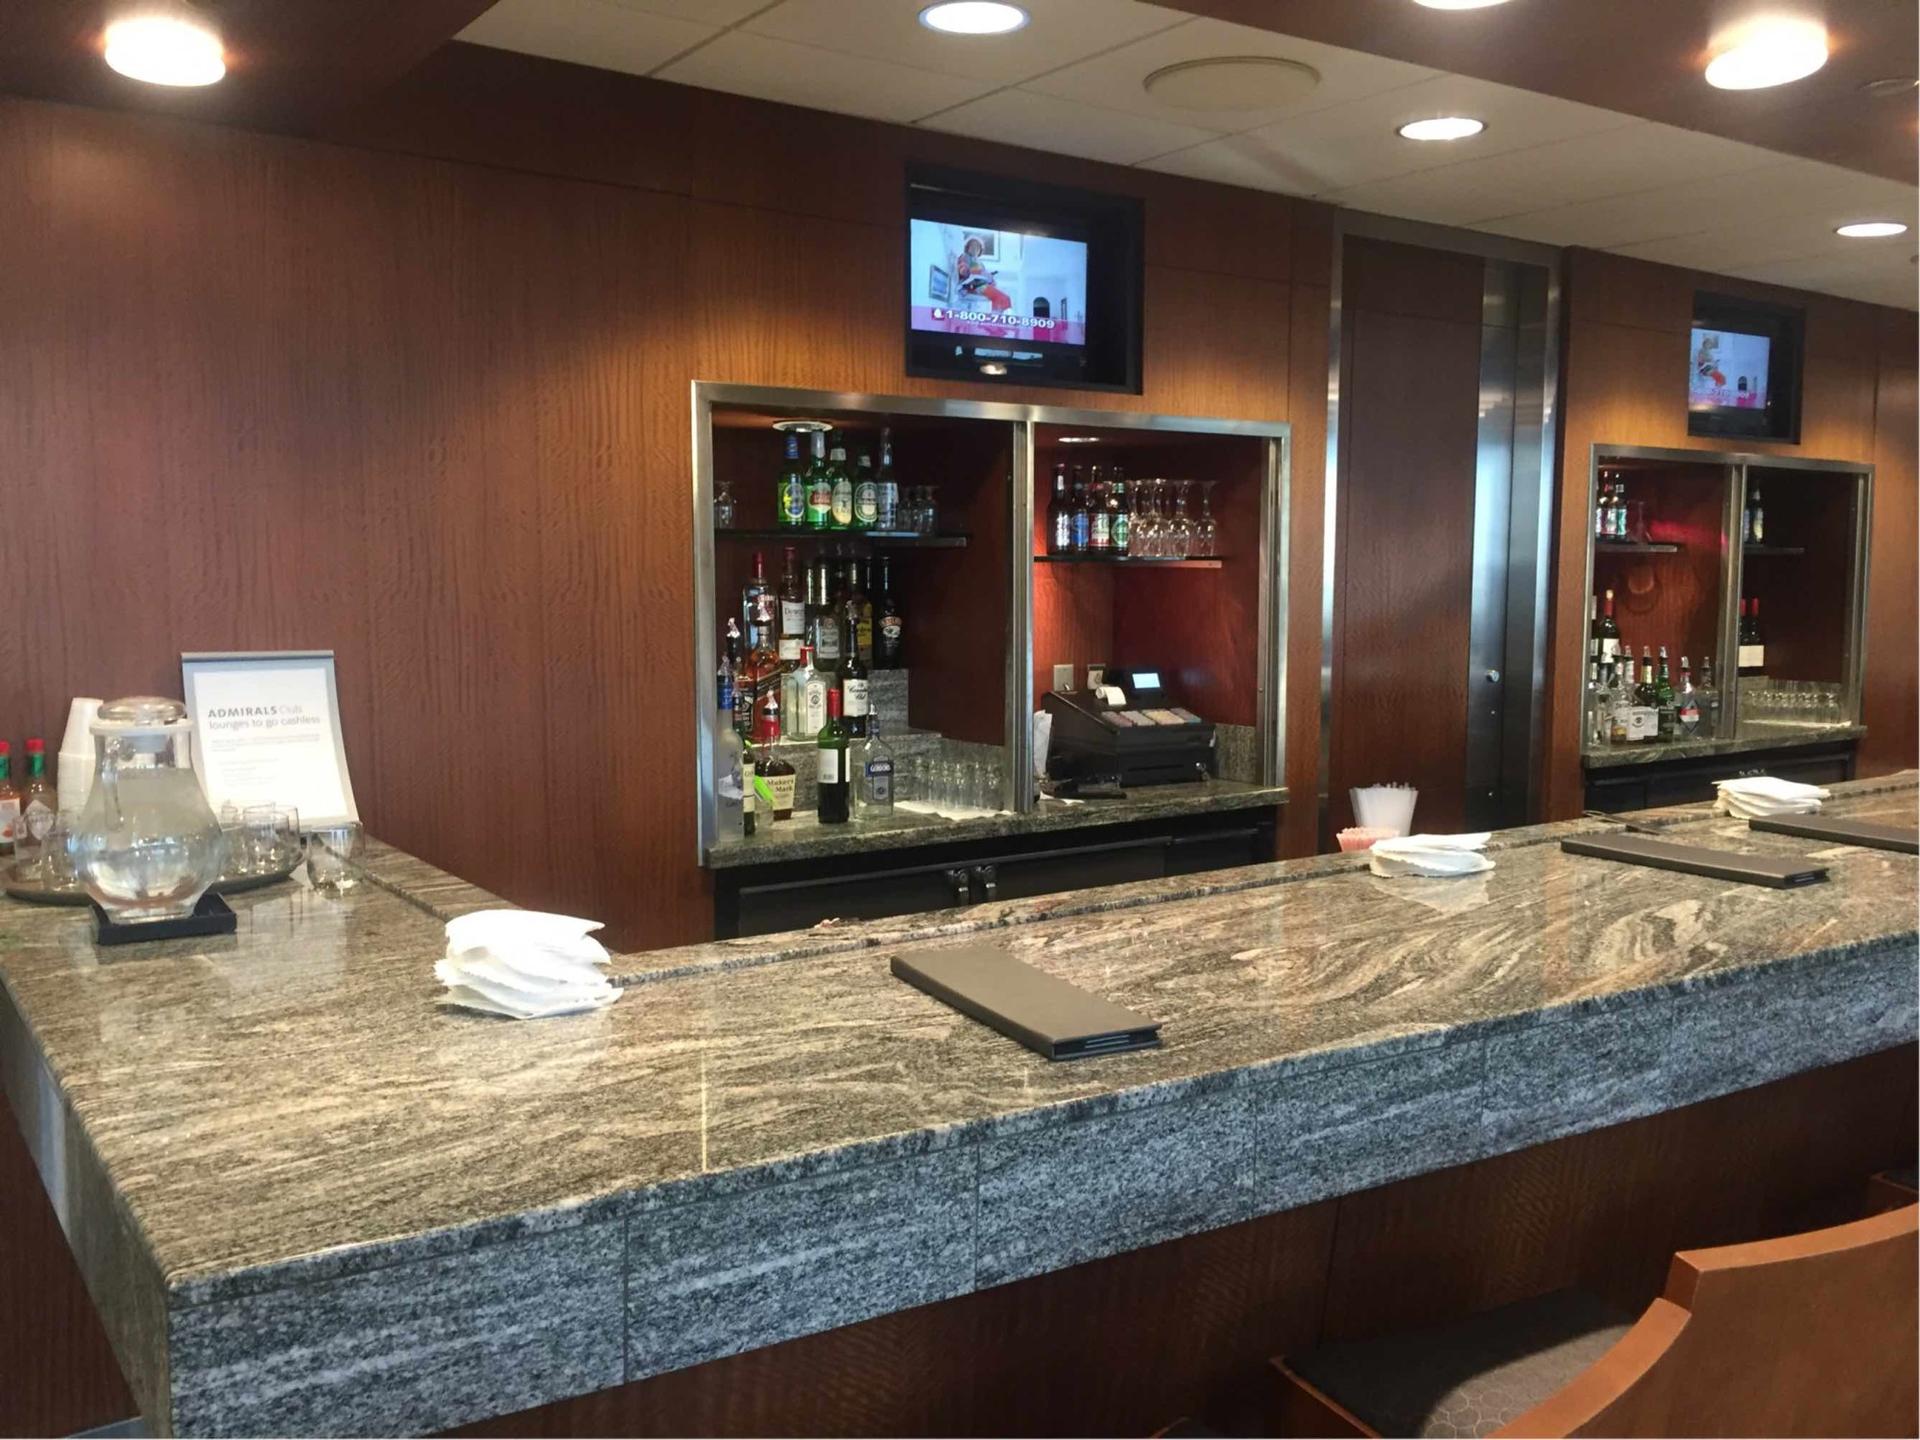 American Airlines Admirals Club image 15 of 48